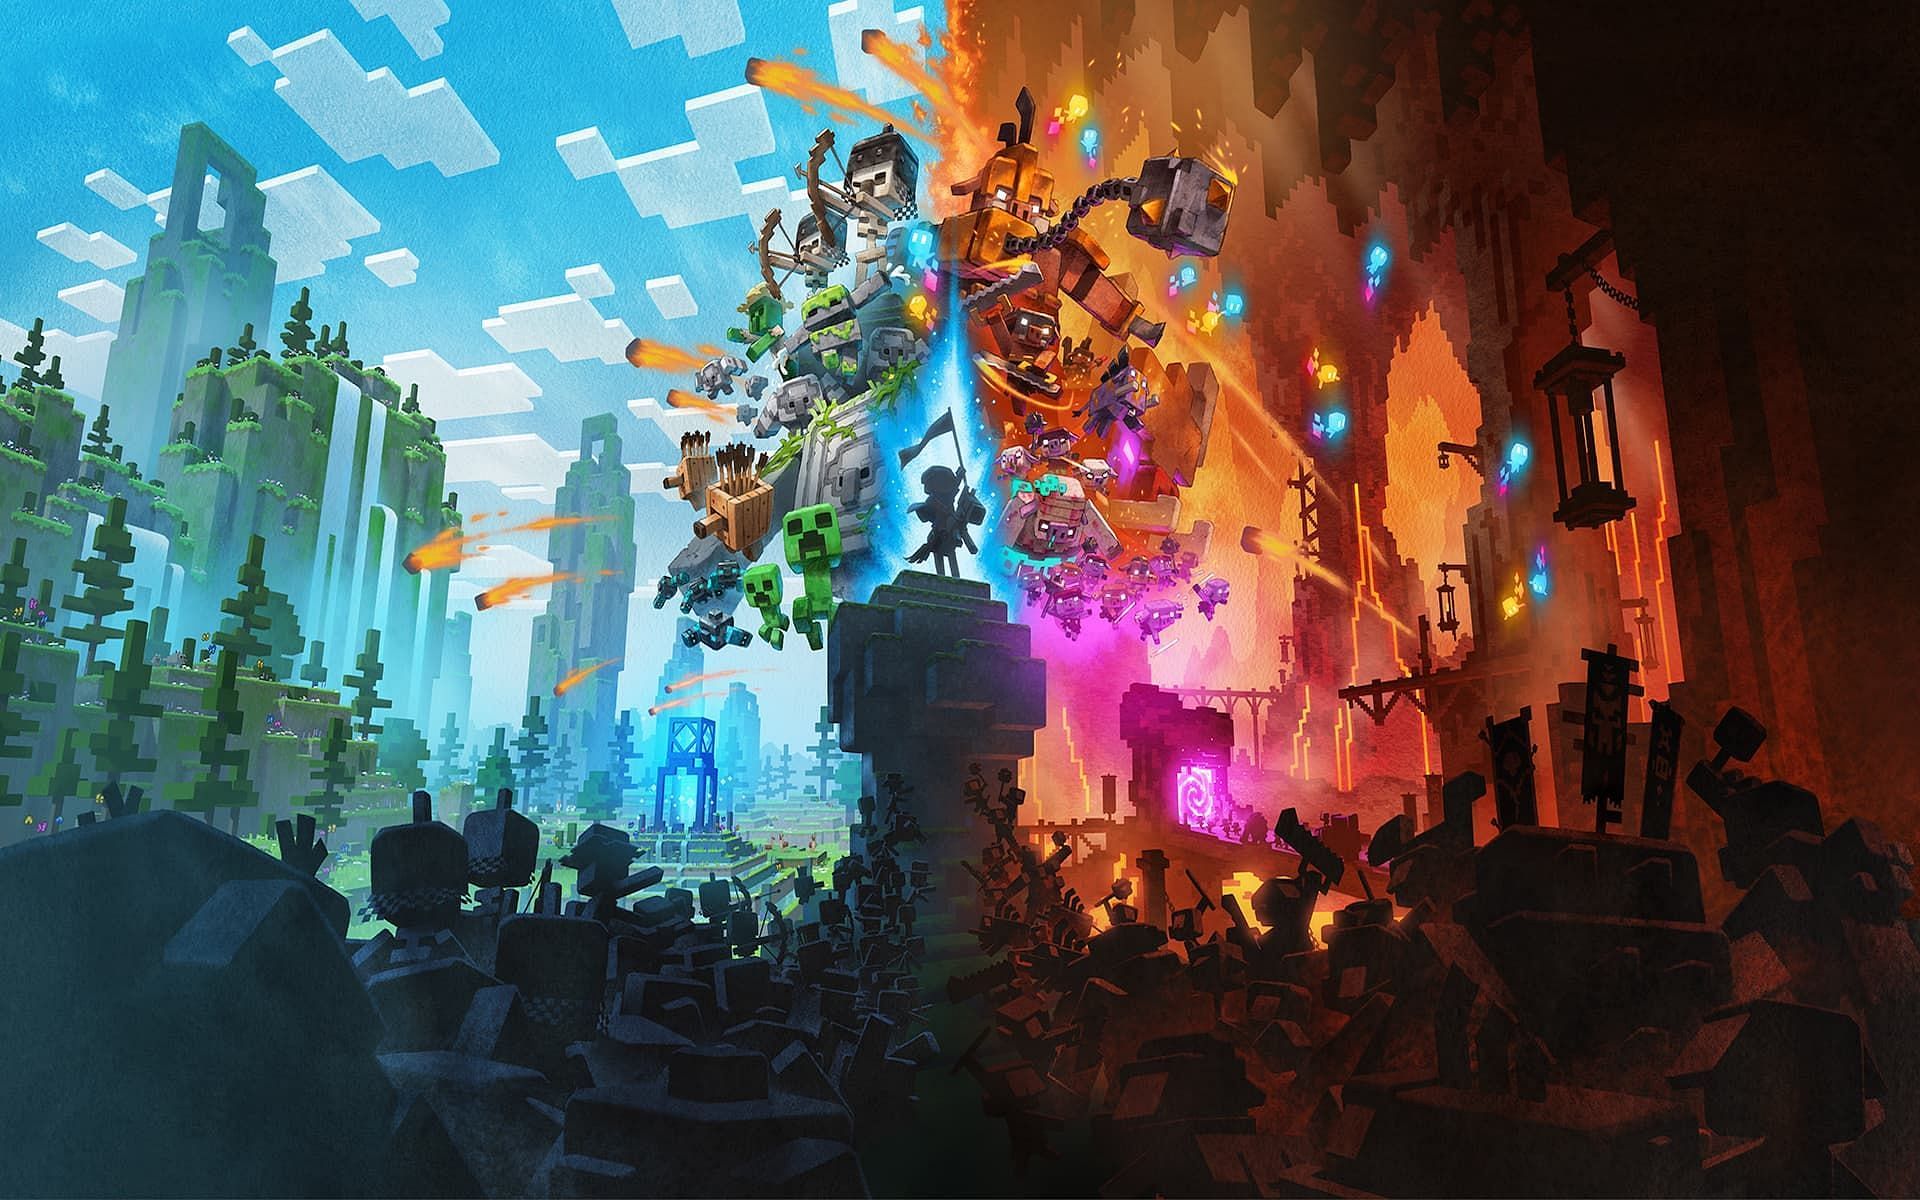 Players can download Minecraft Legends easily on any available platform (Image via Minecraft.net)